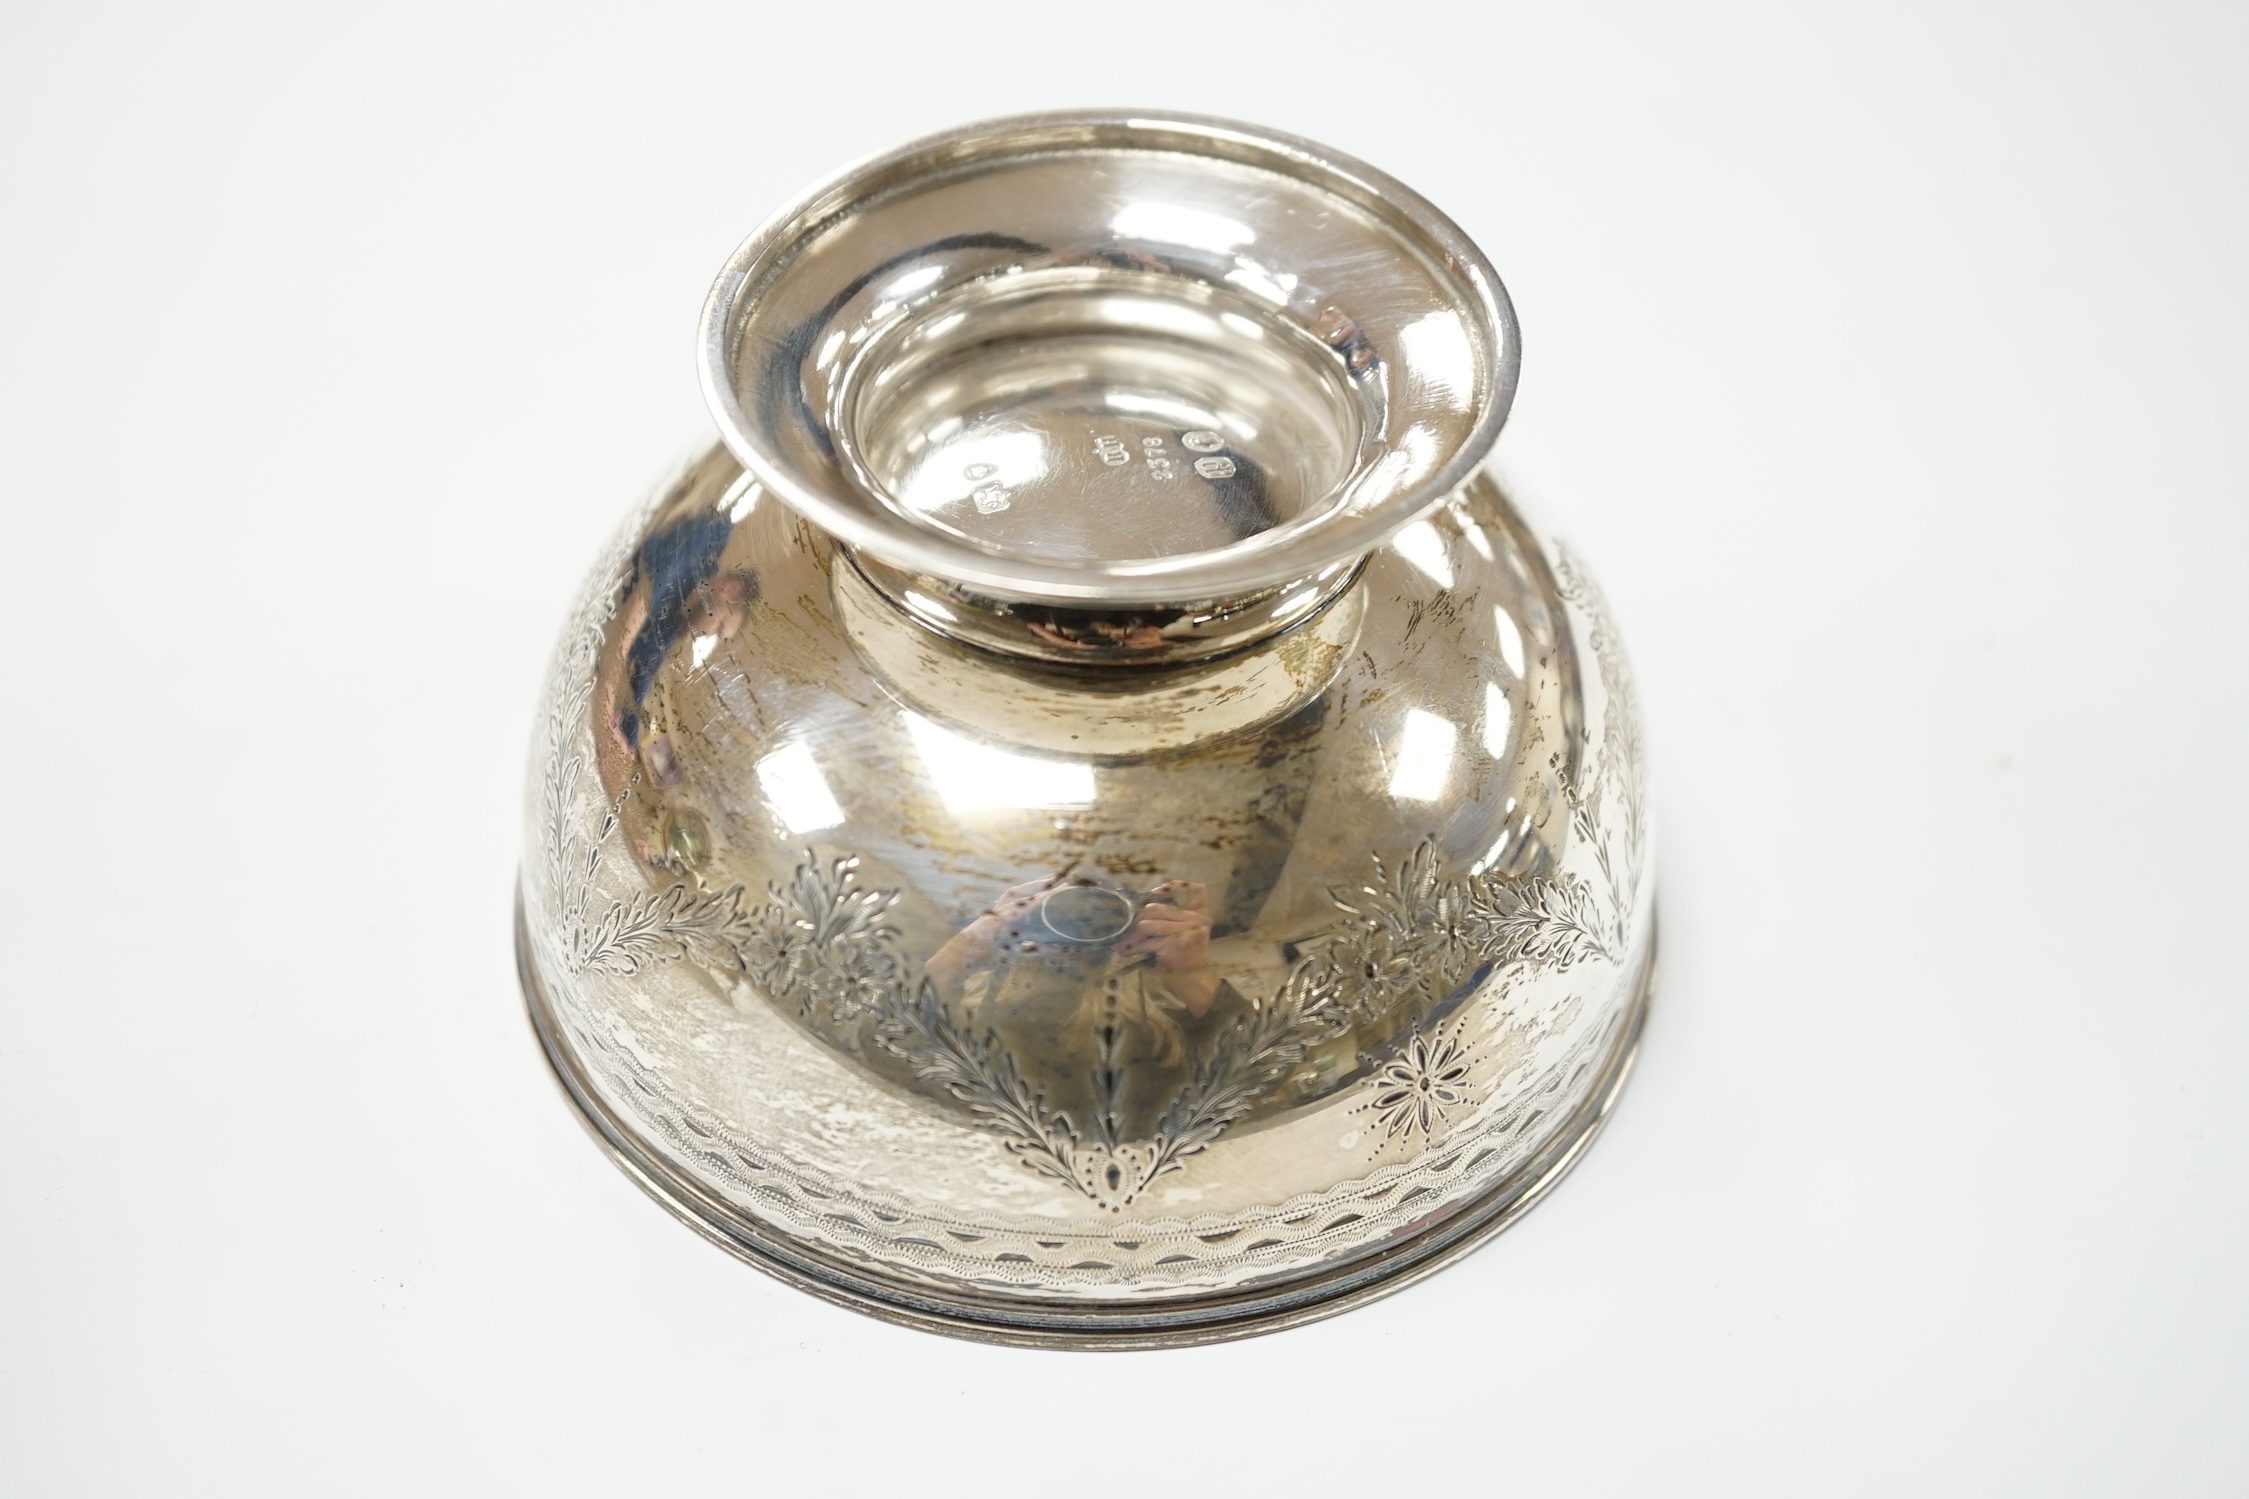 A Victorian silver sugar bowl, Robert Harper, London, 1870, diameter 11.1cm, together with a George V repousse silver trinket box, 8.2oz. Good to fair condition.